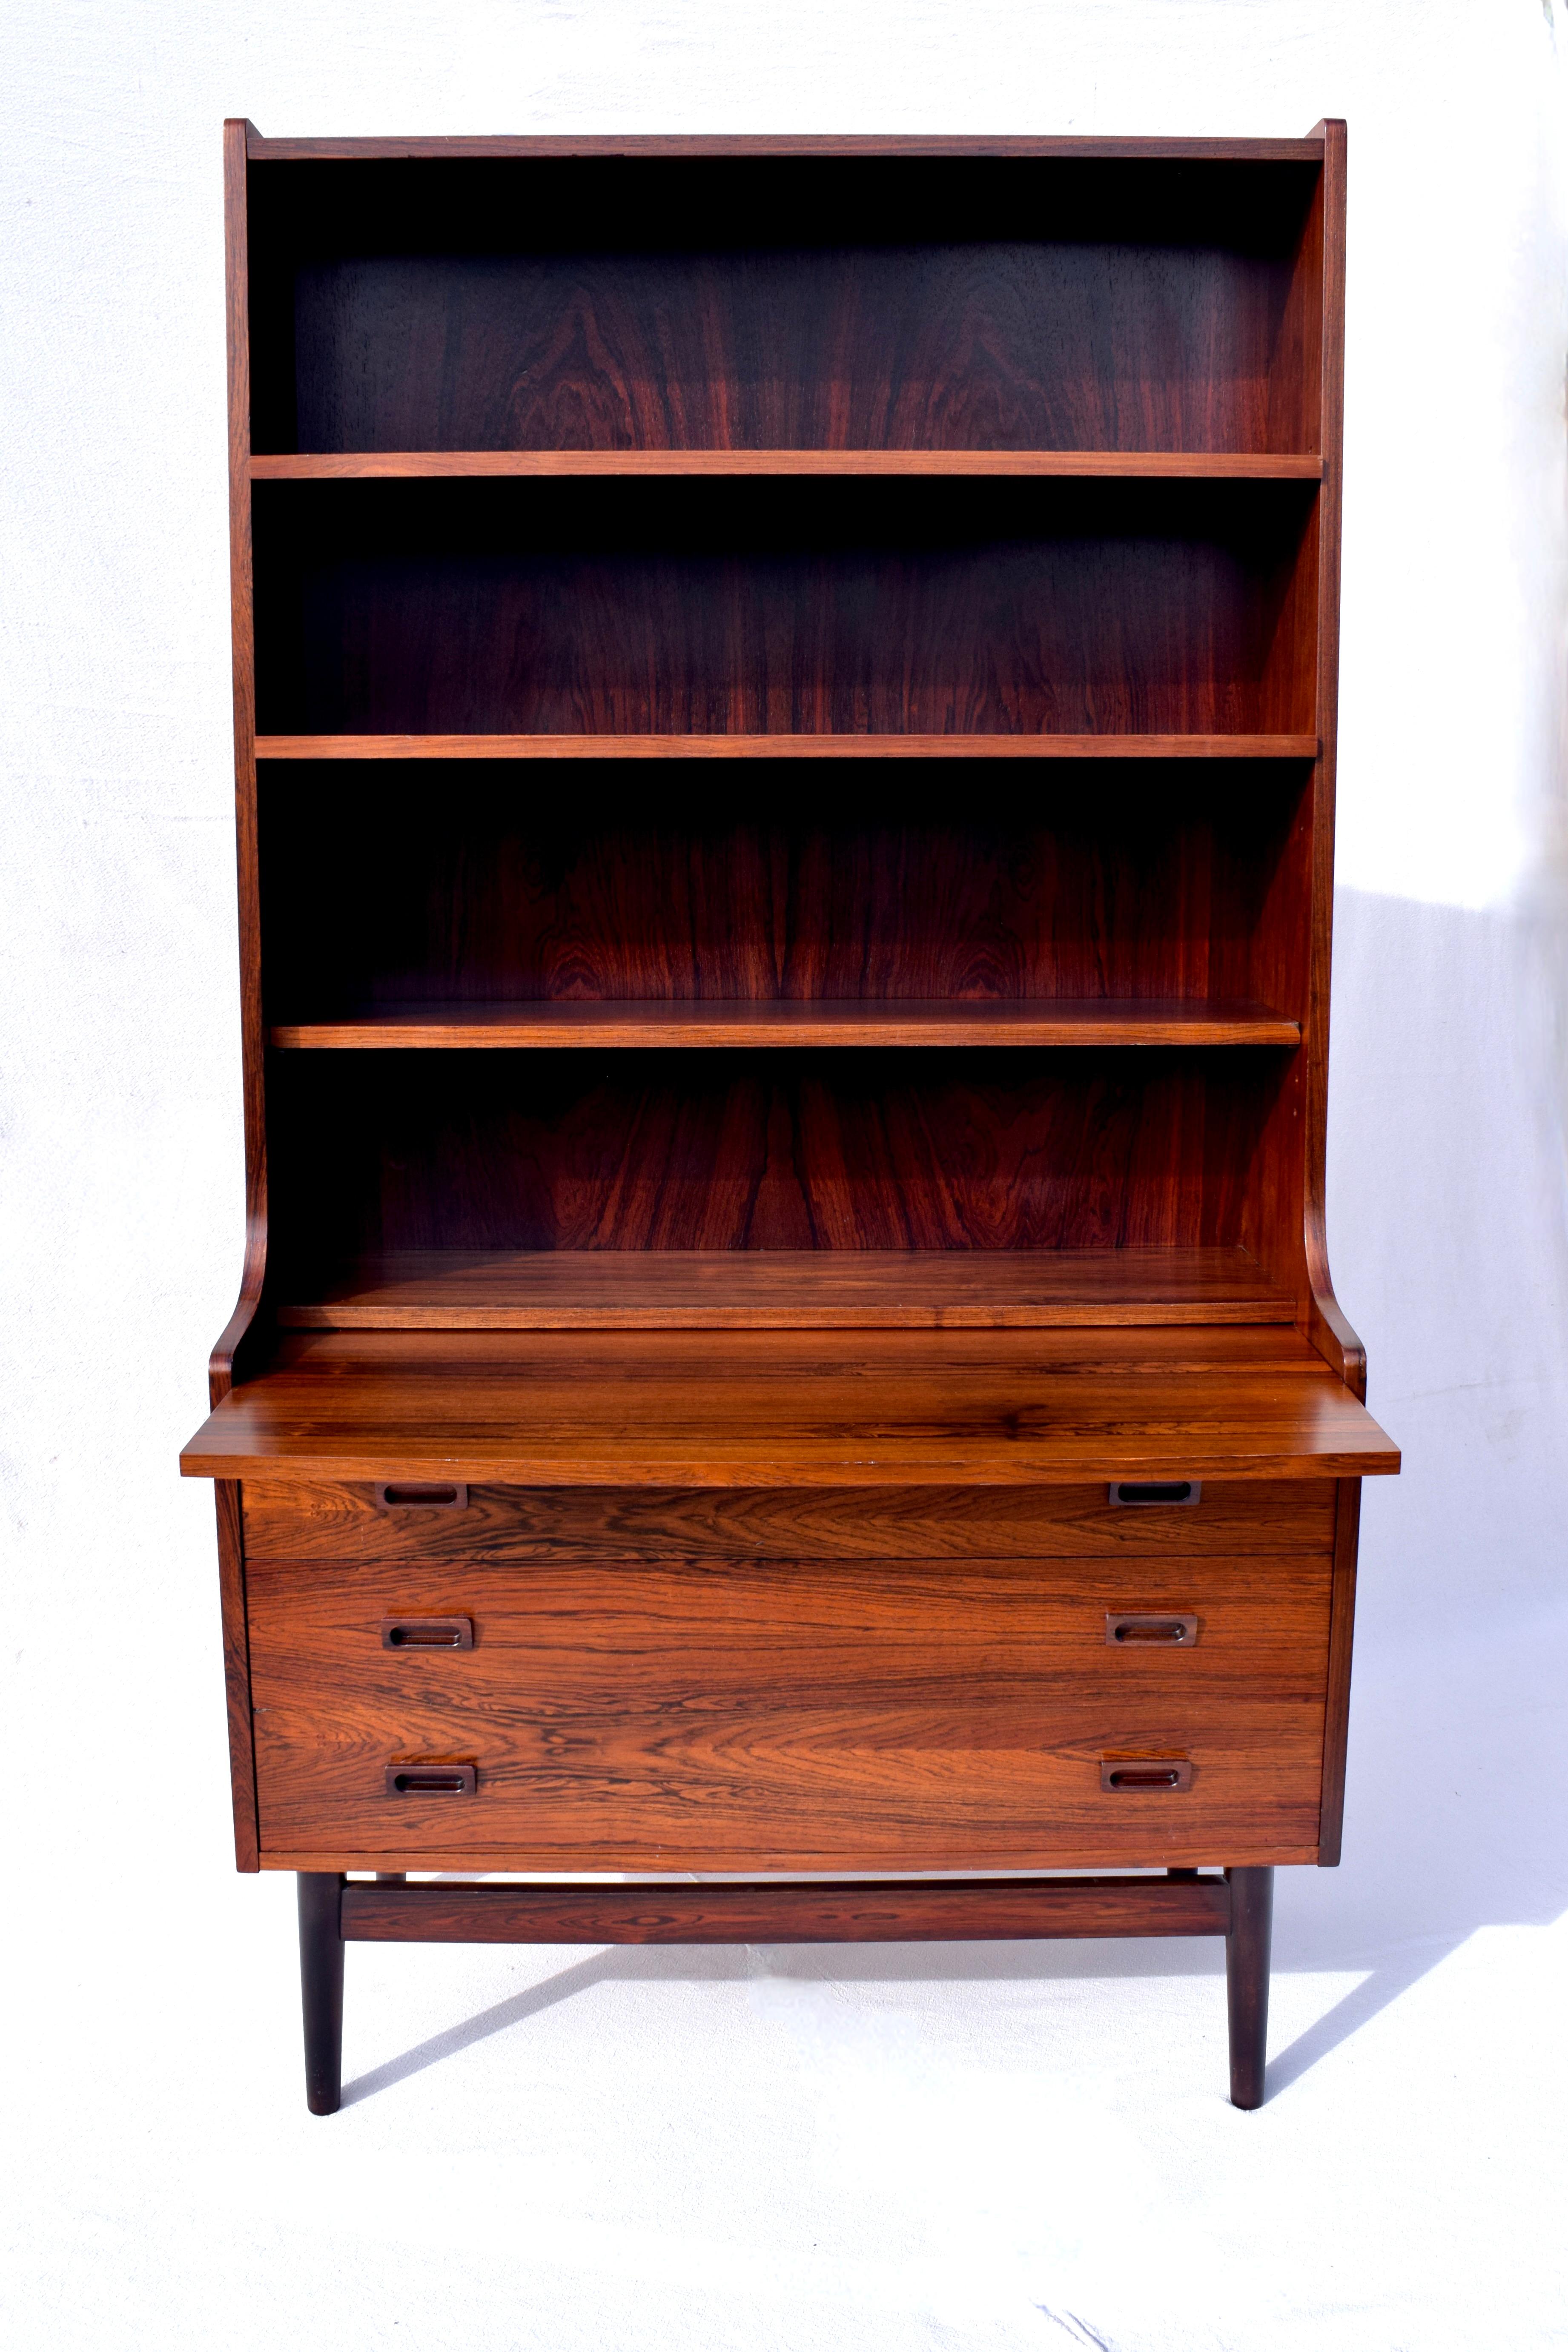 Danish Modern Brazilian Rosewood secretary desk by Johannes Sorth number 331 32. 
Multifunctional having three adjustable bookshelves to the tapered top with pull out pocket desk & three drawers. All original finish is in excellent vintage condition